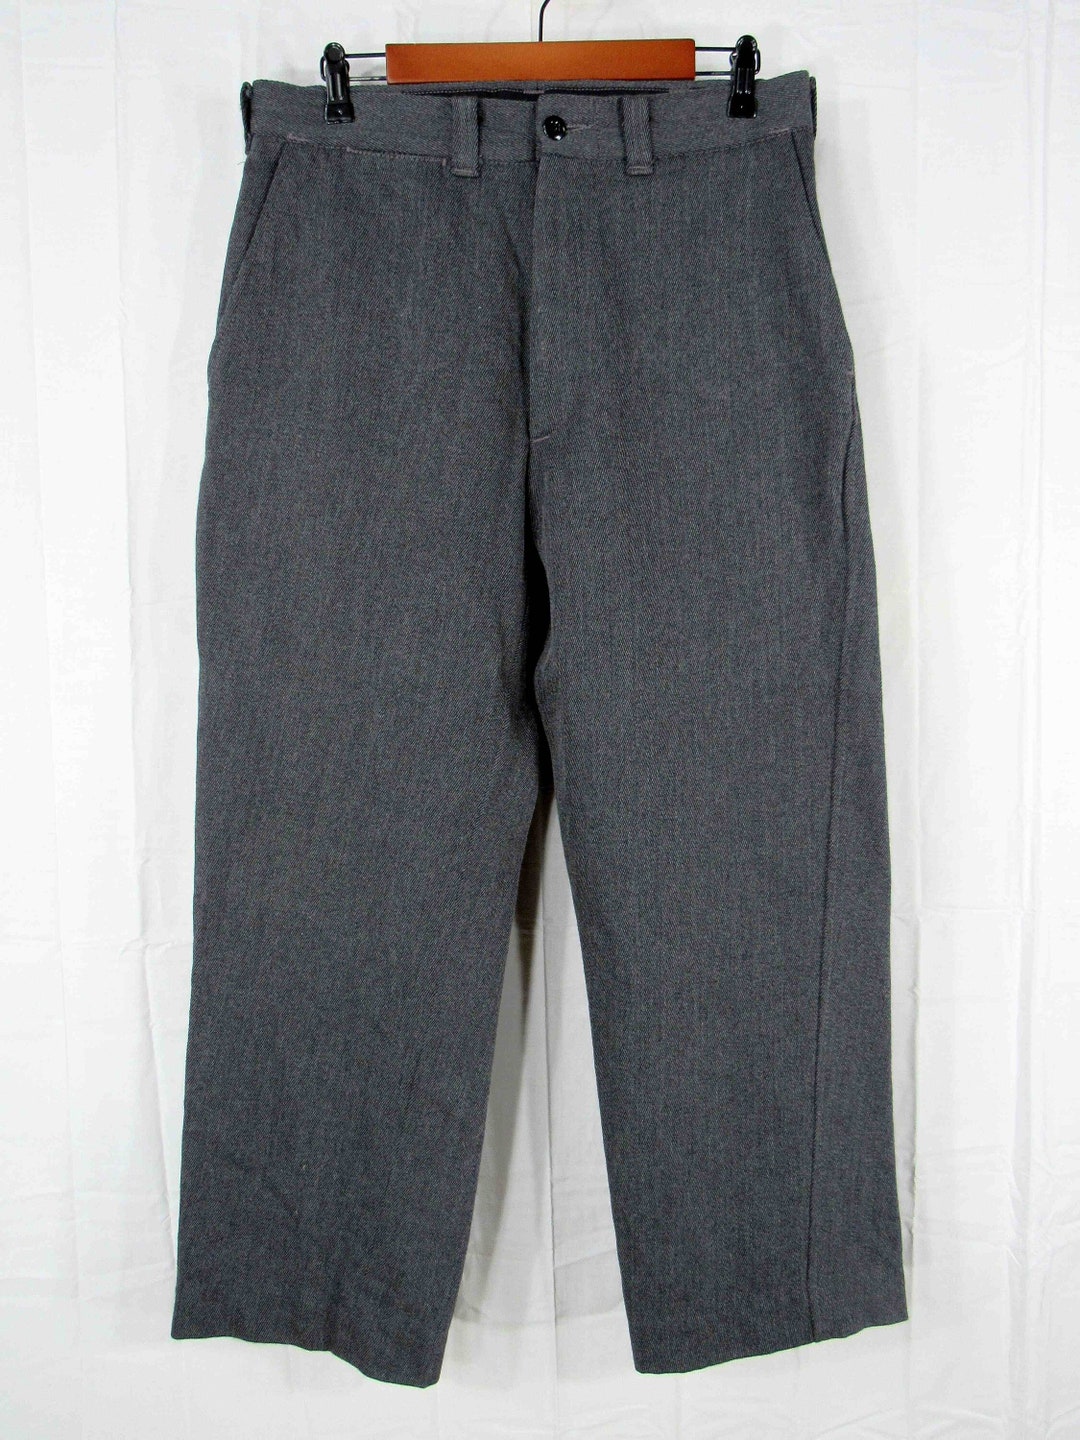 90s Vintage Filson Men's Gray Wool Whipcord Trousers - Etsy